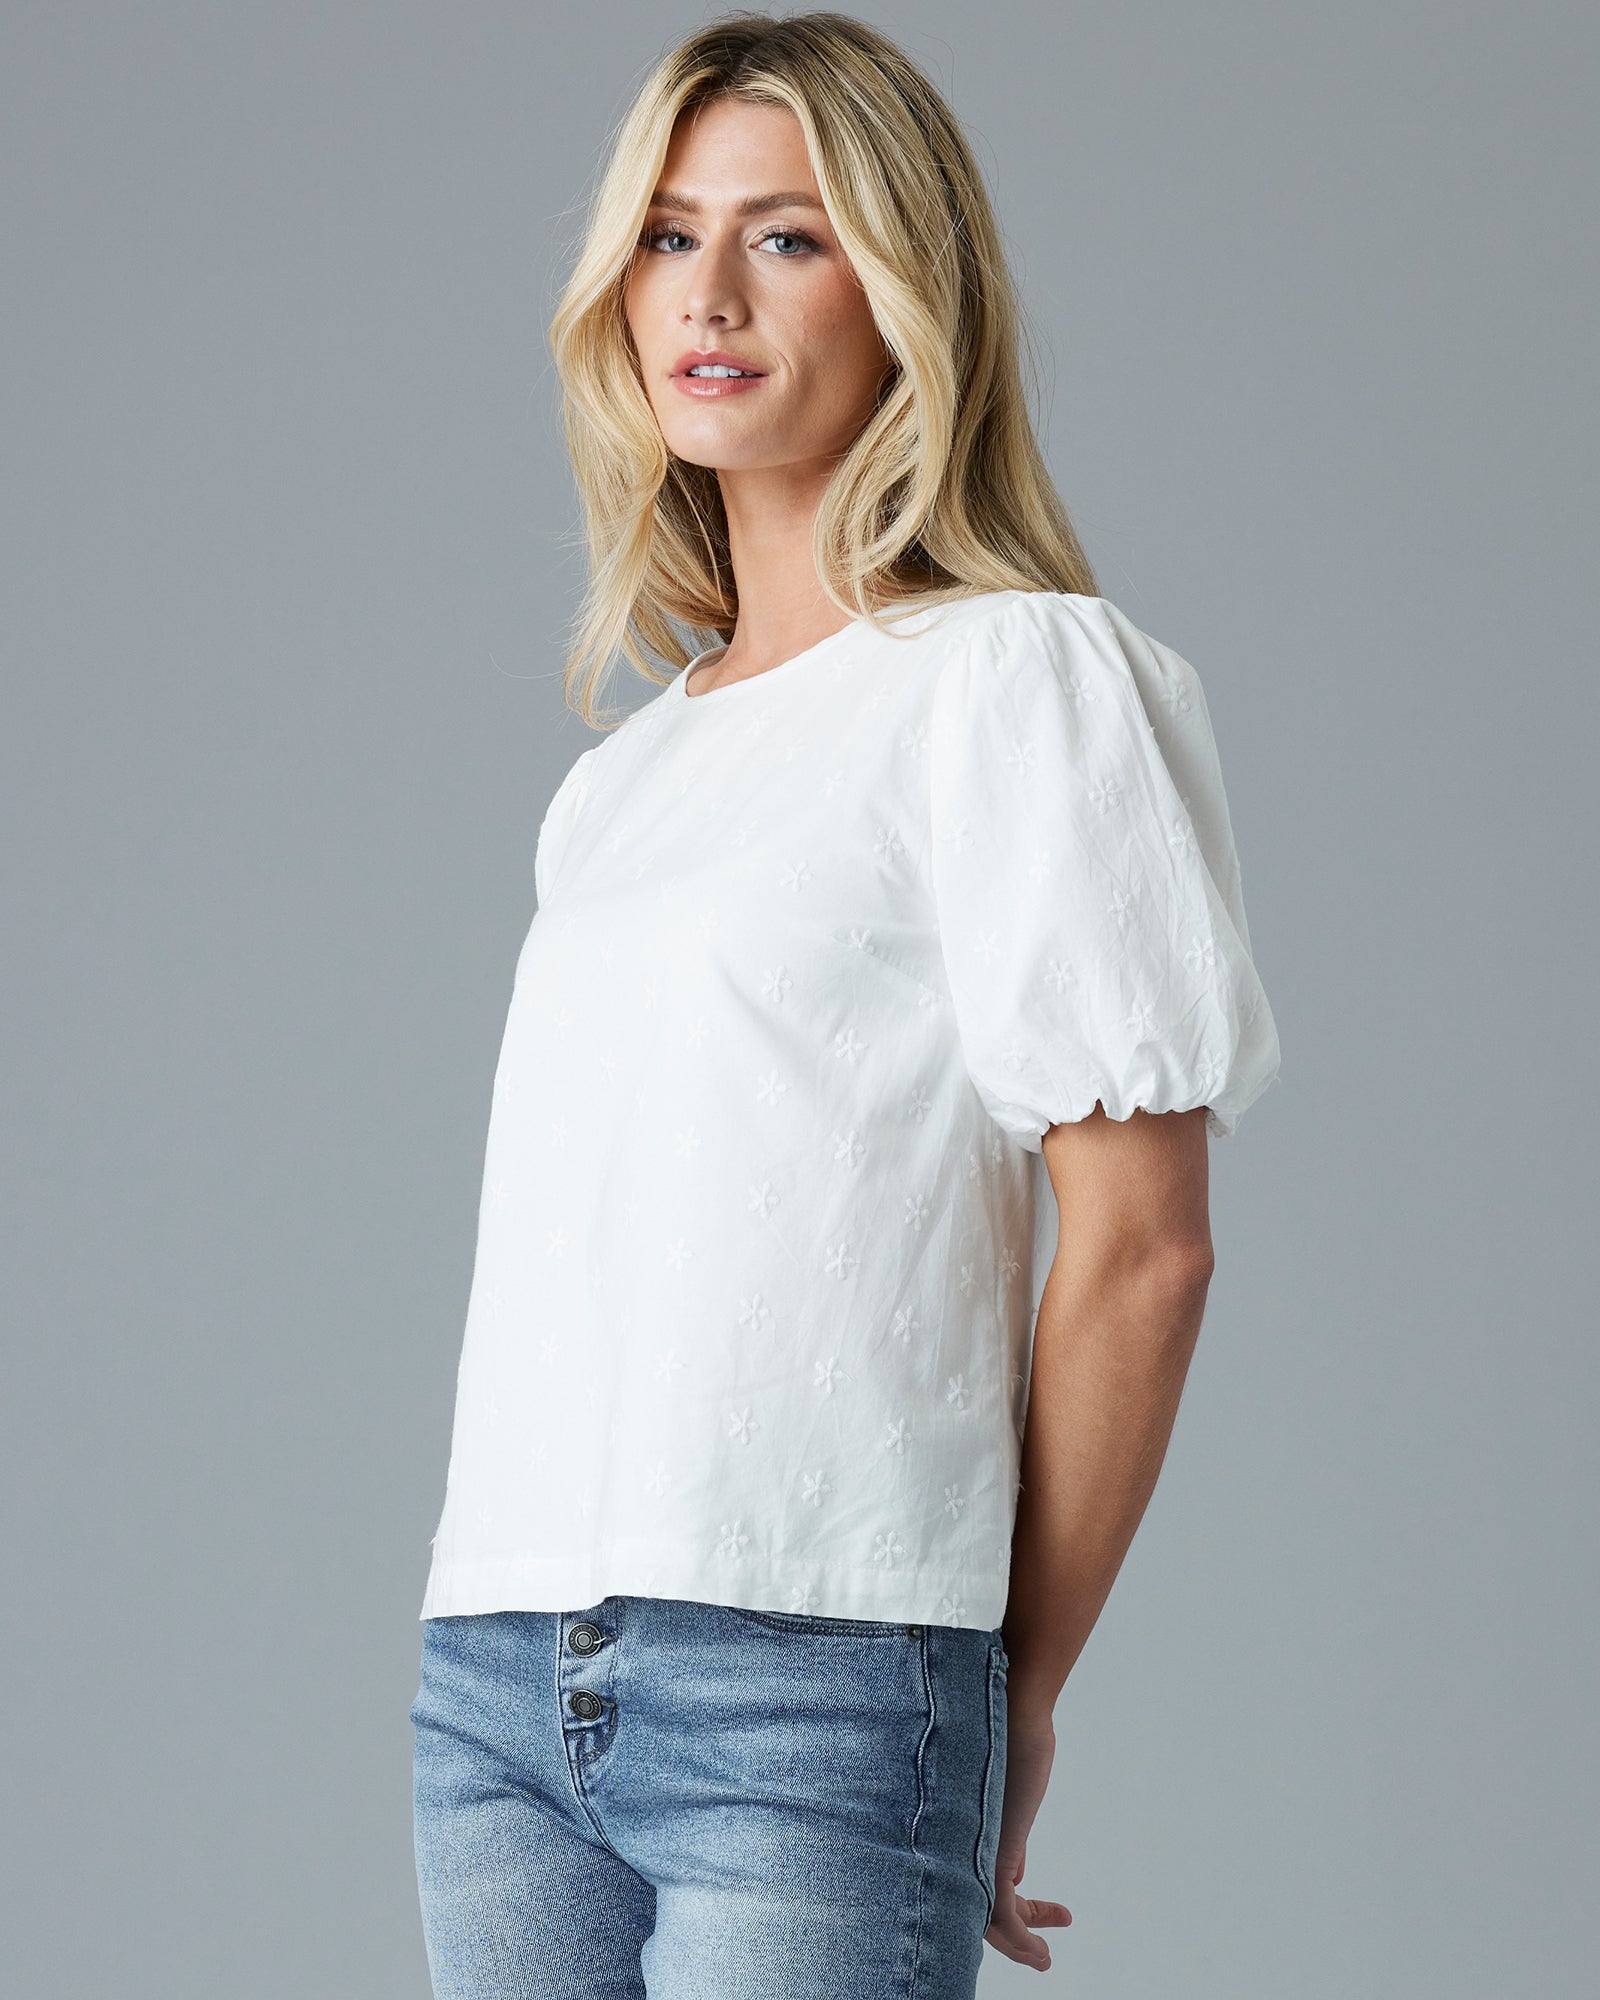 Woman in a white, short puffed sleeve blouse